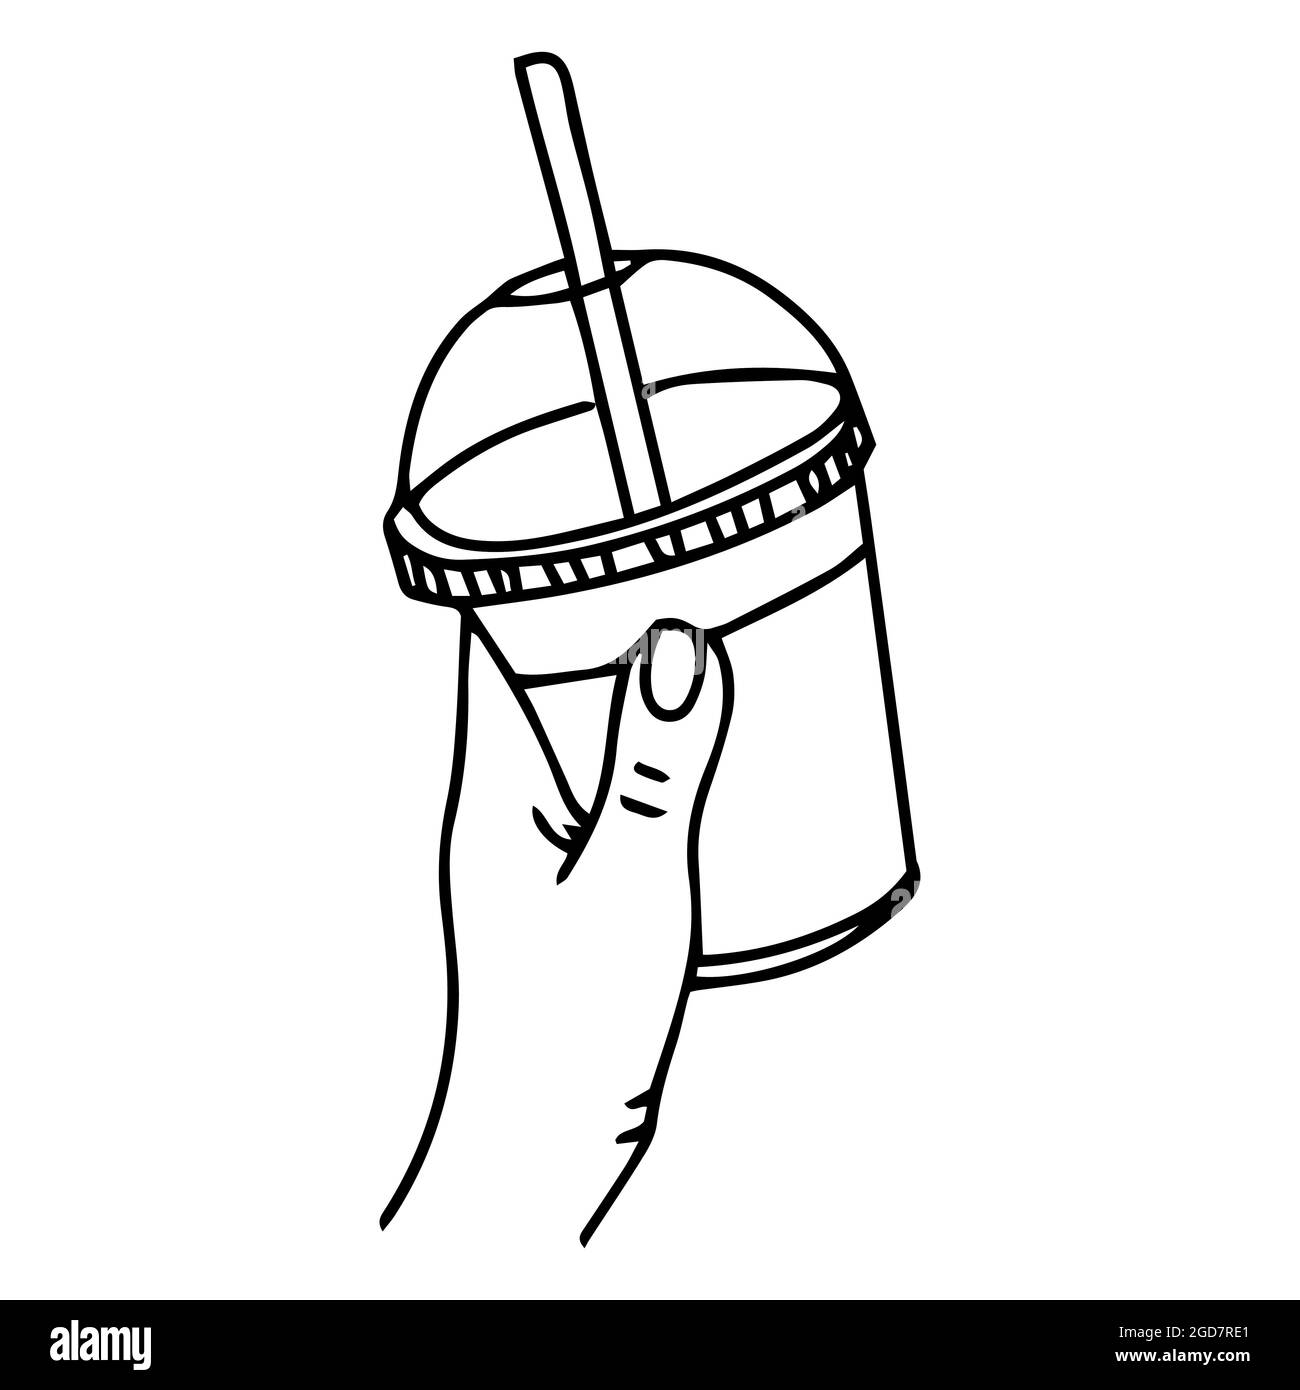 Isolated vector illustration on white background doodle hand with glass. Takeaway drink. Hand holds a glass with milkshake, coffee, lemonade. Stock Vector